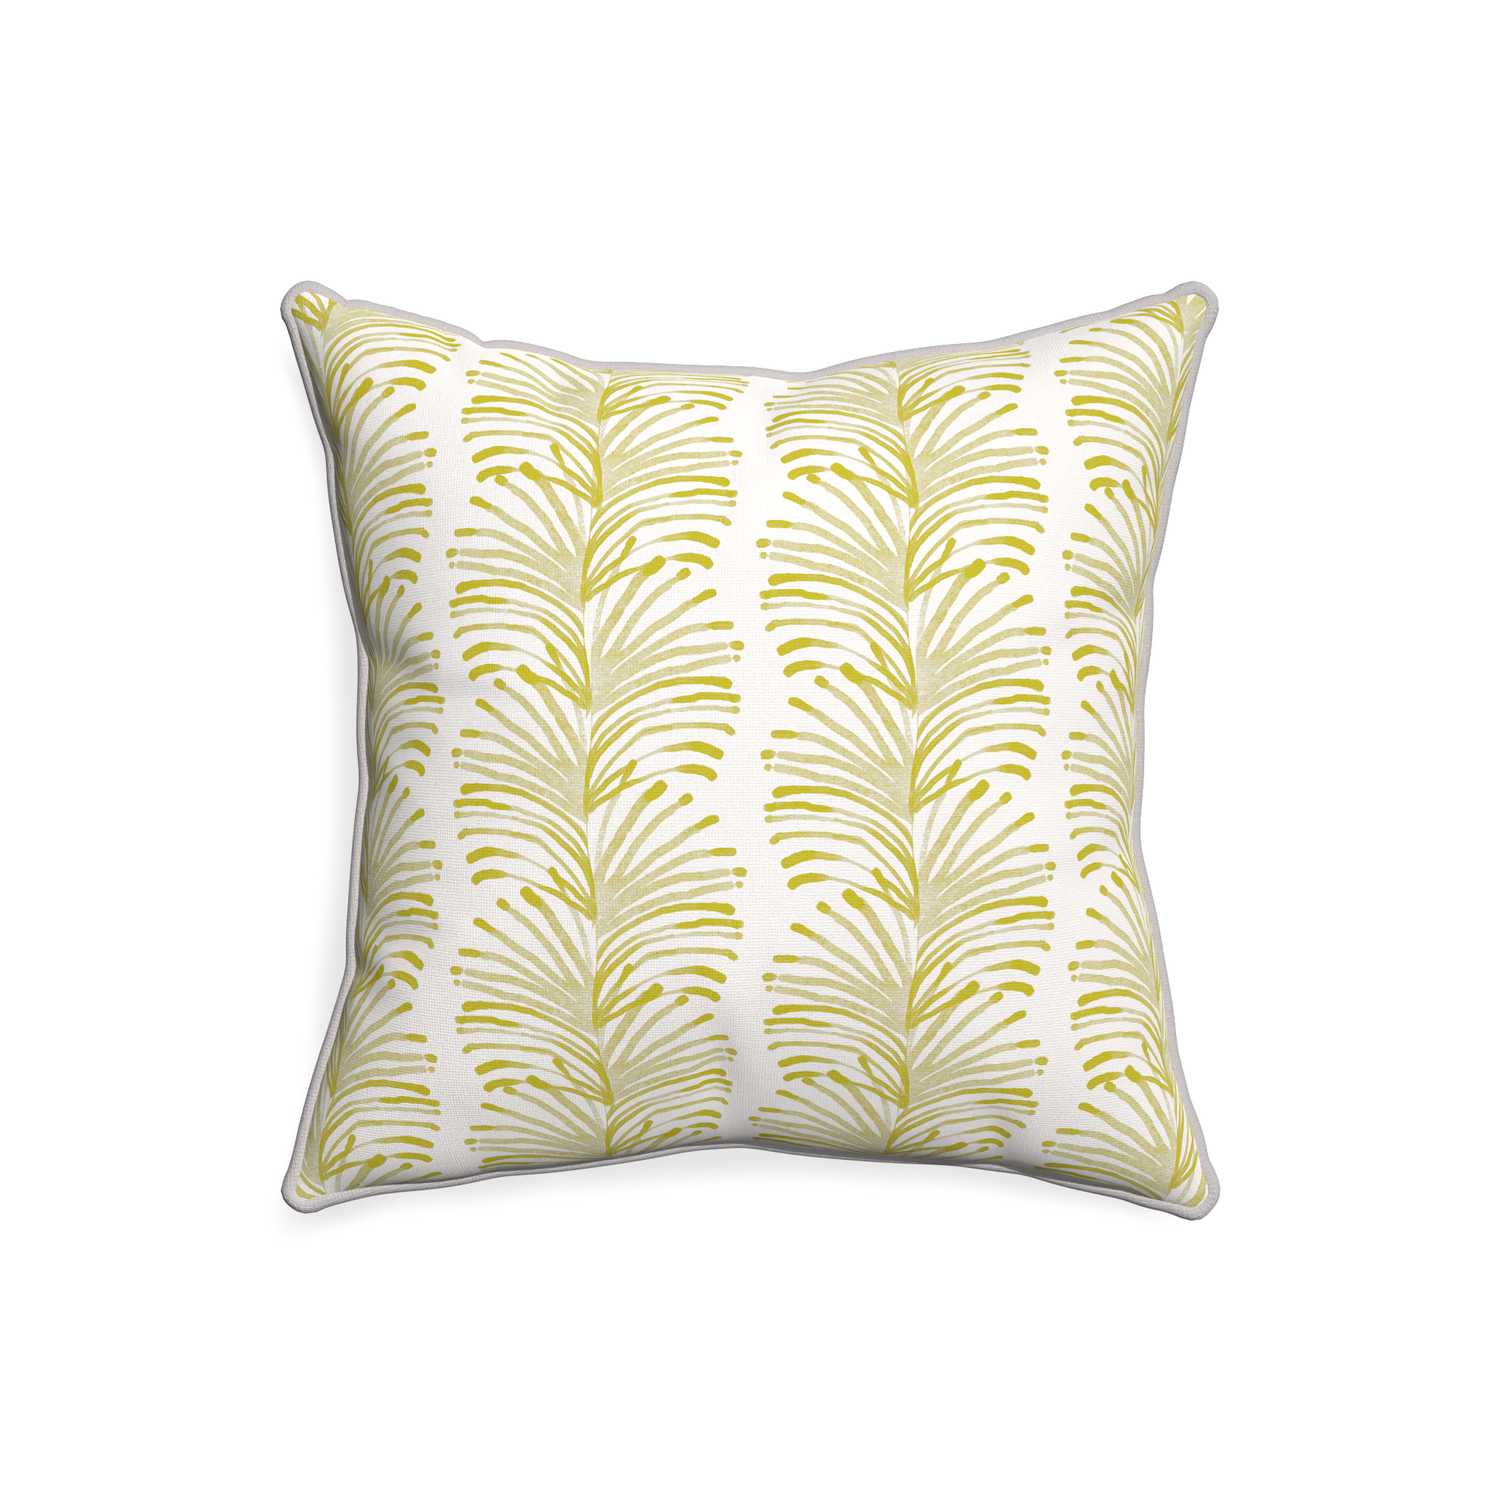 20-square emma chartreuse custom pillow with pebble piping on white background